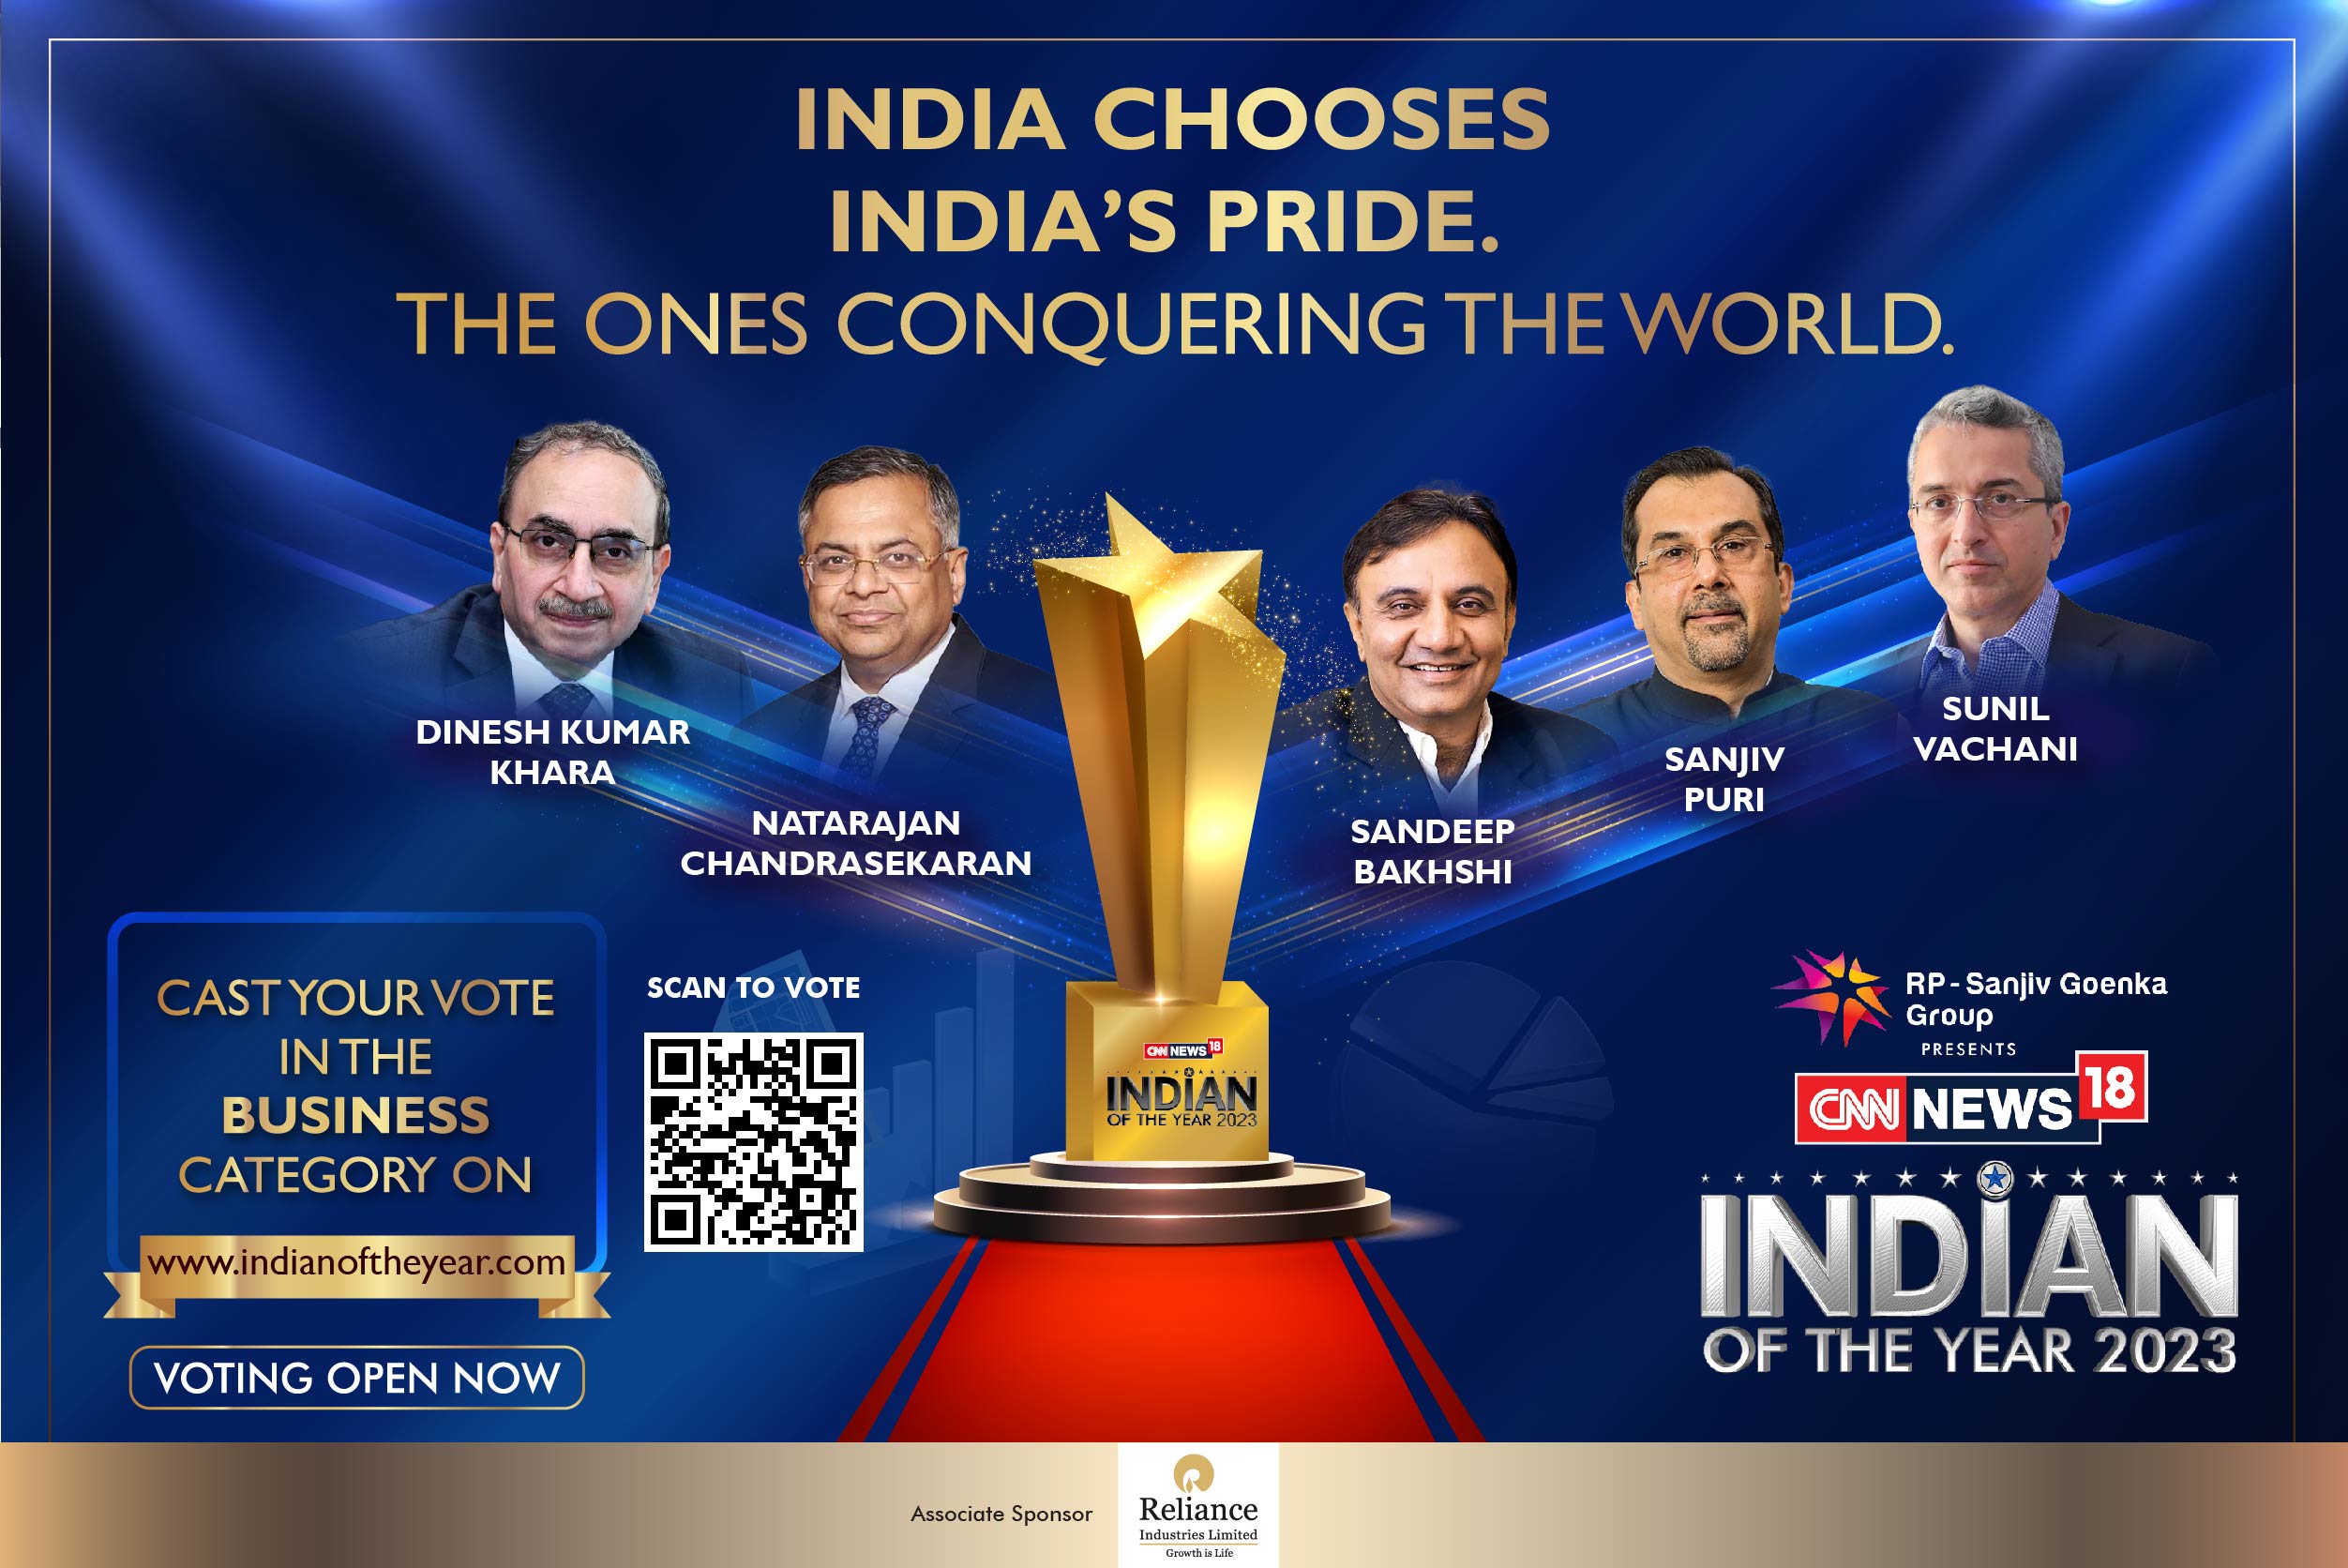 CNN-News18 Indian of the Year 2023 to recognise industry titans who are shaping India's economic progress